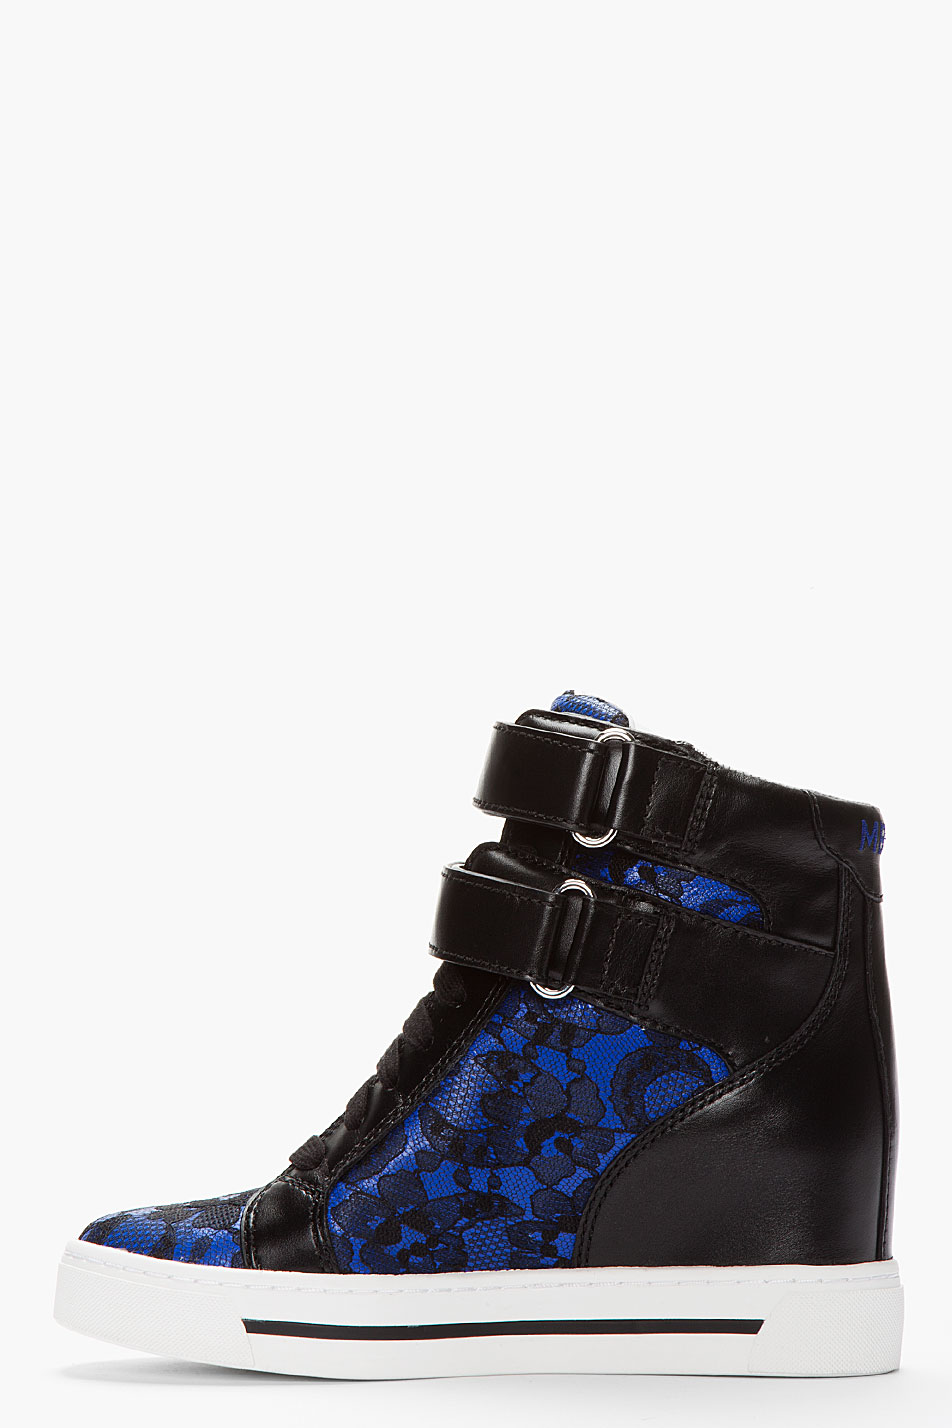 Lyst - Marc By Marc Jacobs Royal Blue Lace Sneaker Wedge in Blue